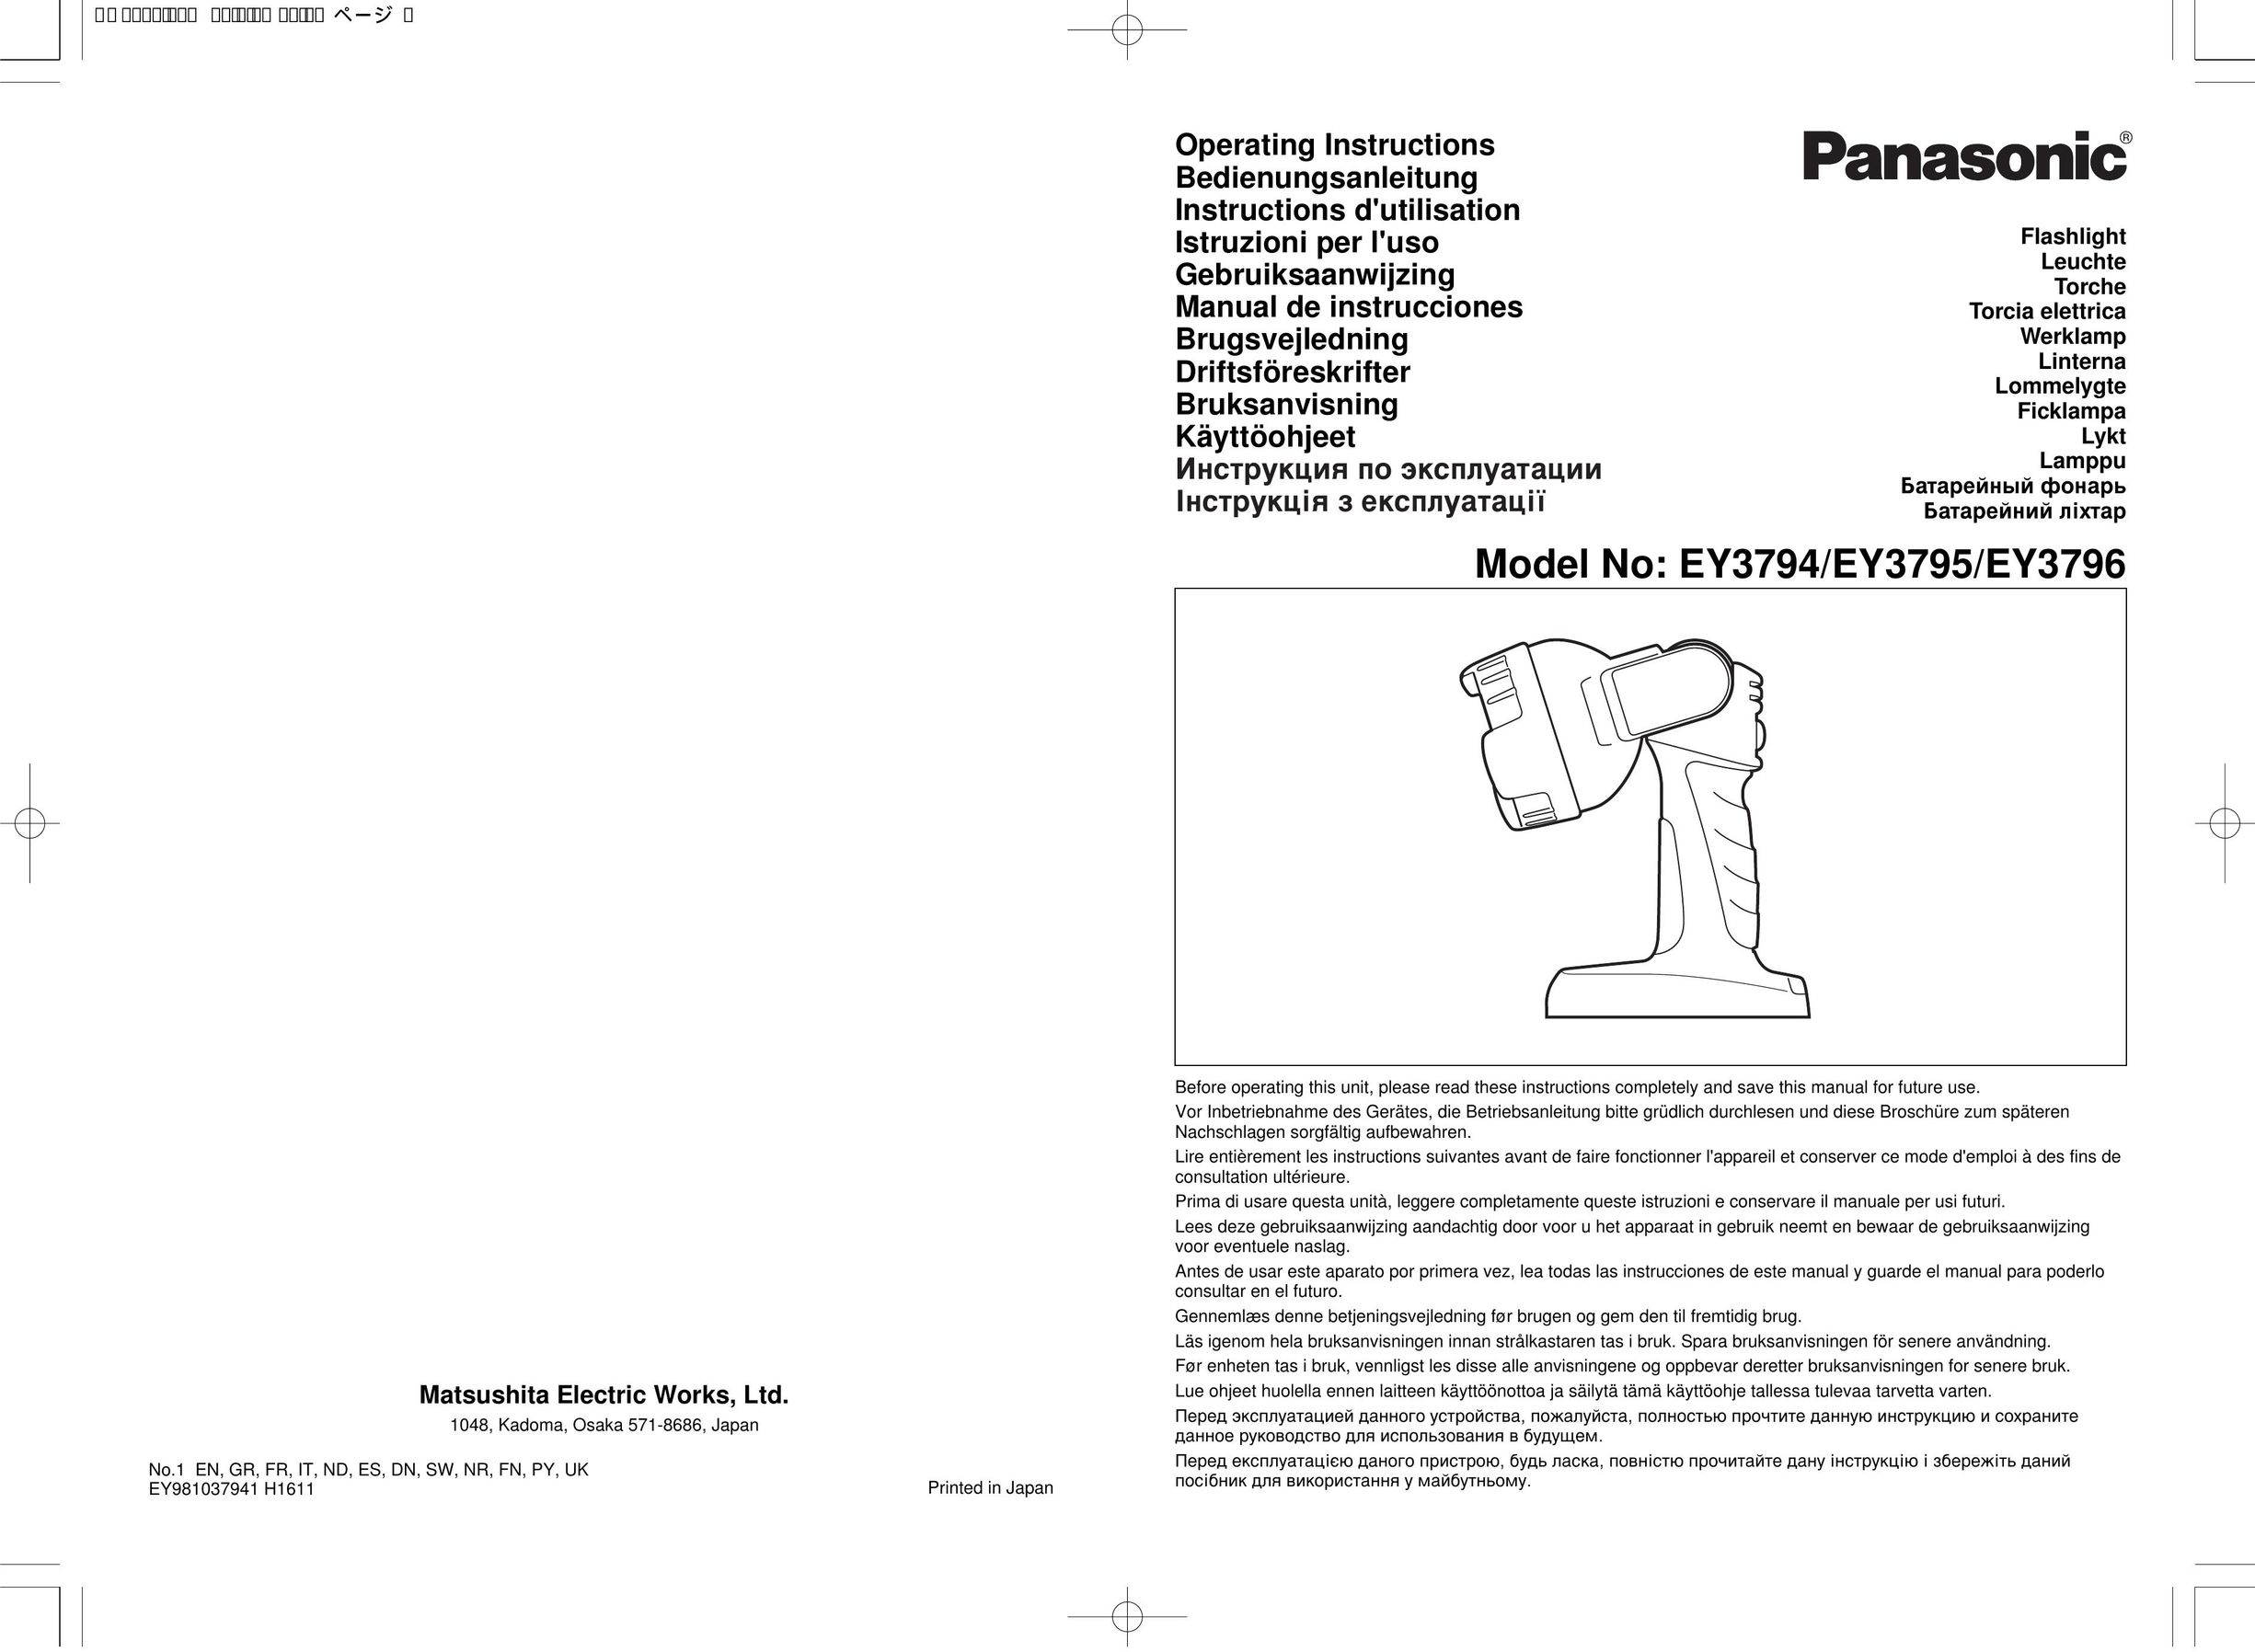 Panasonic EY3795 Home Safety Product User Manual